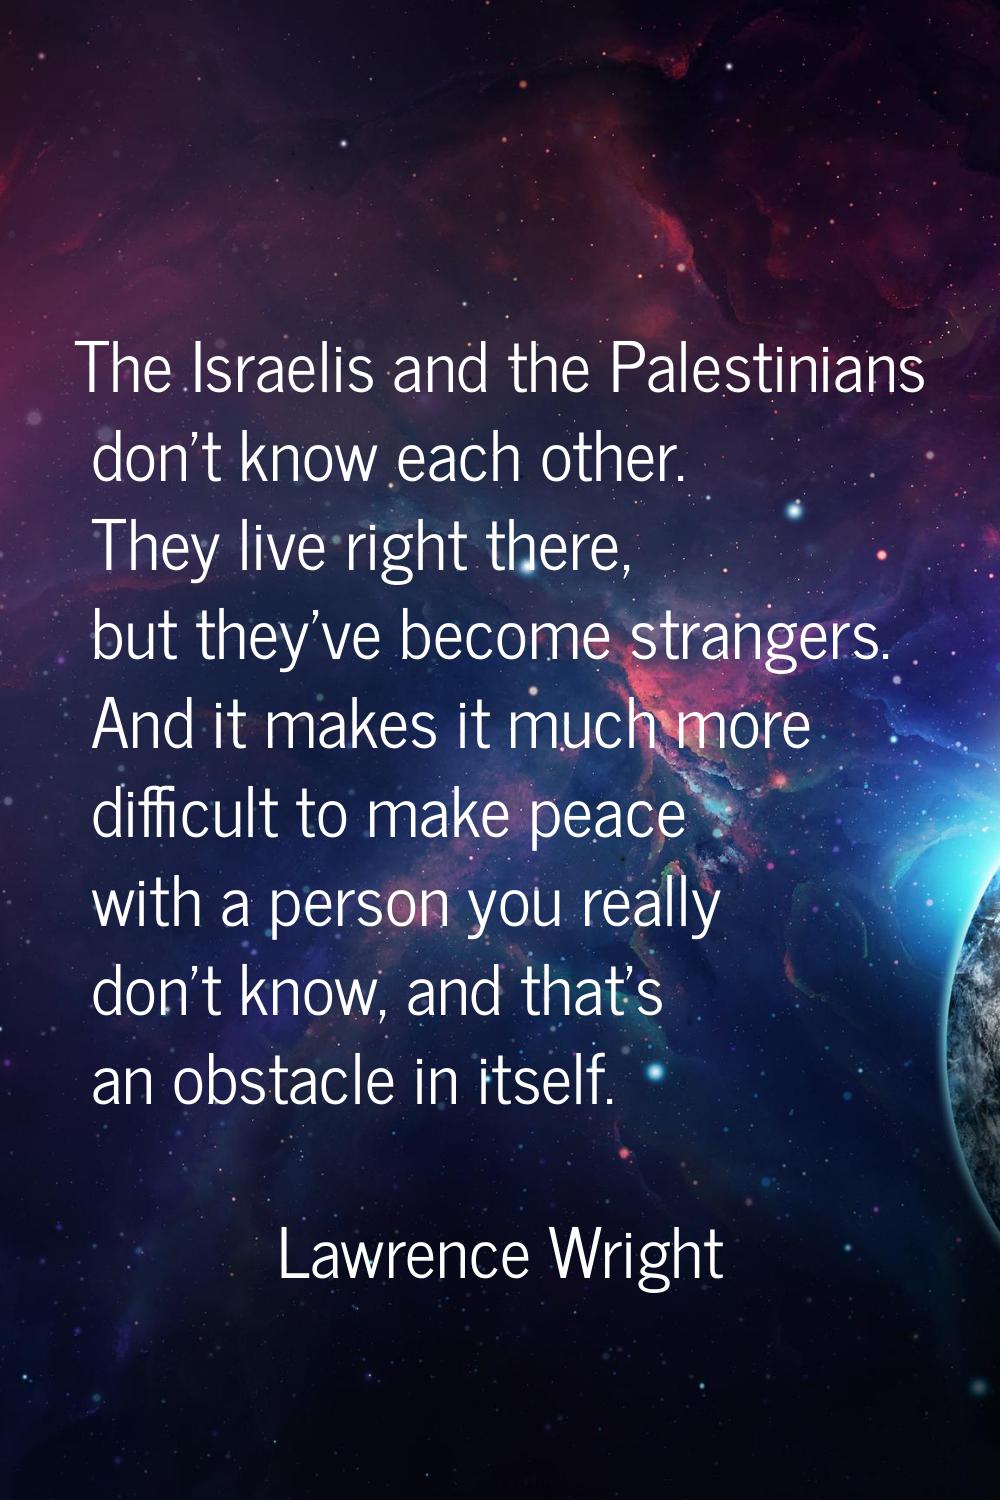 The Israelis and the Palestinians don't know each other. They live right there, but they've become 